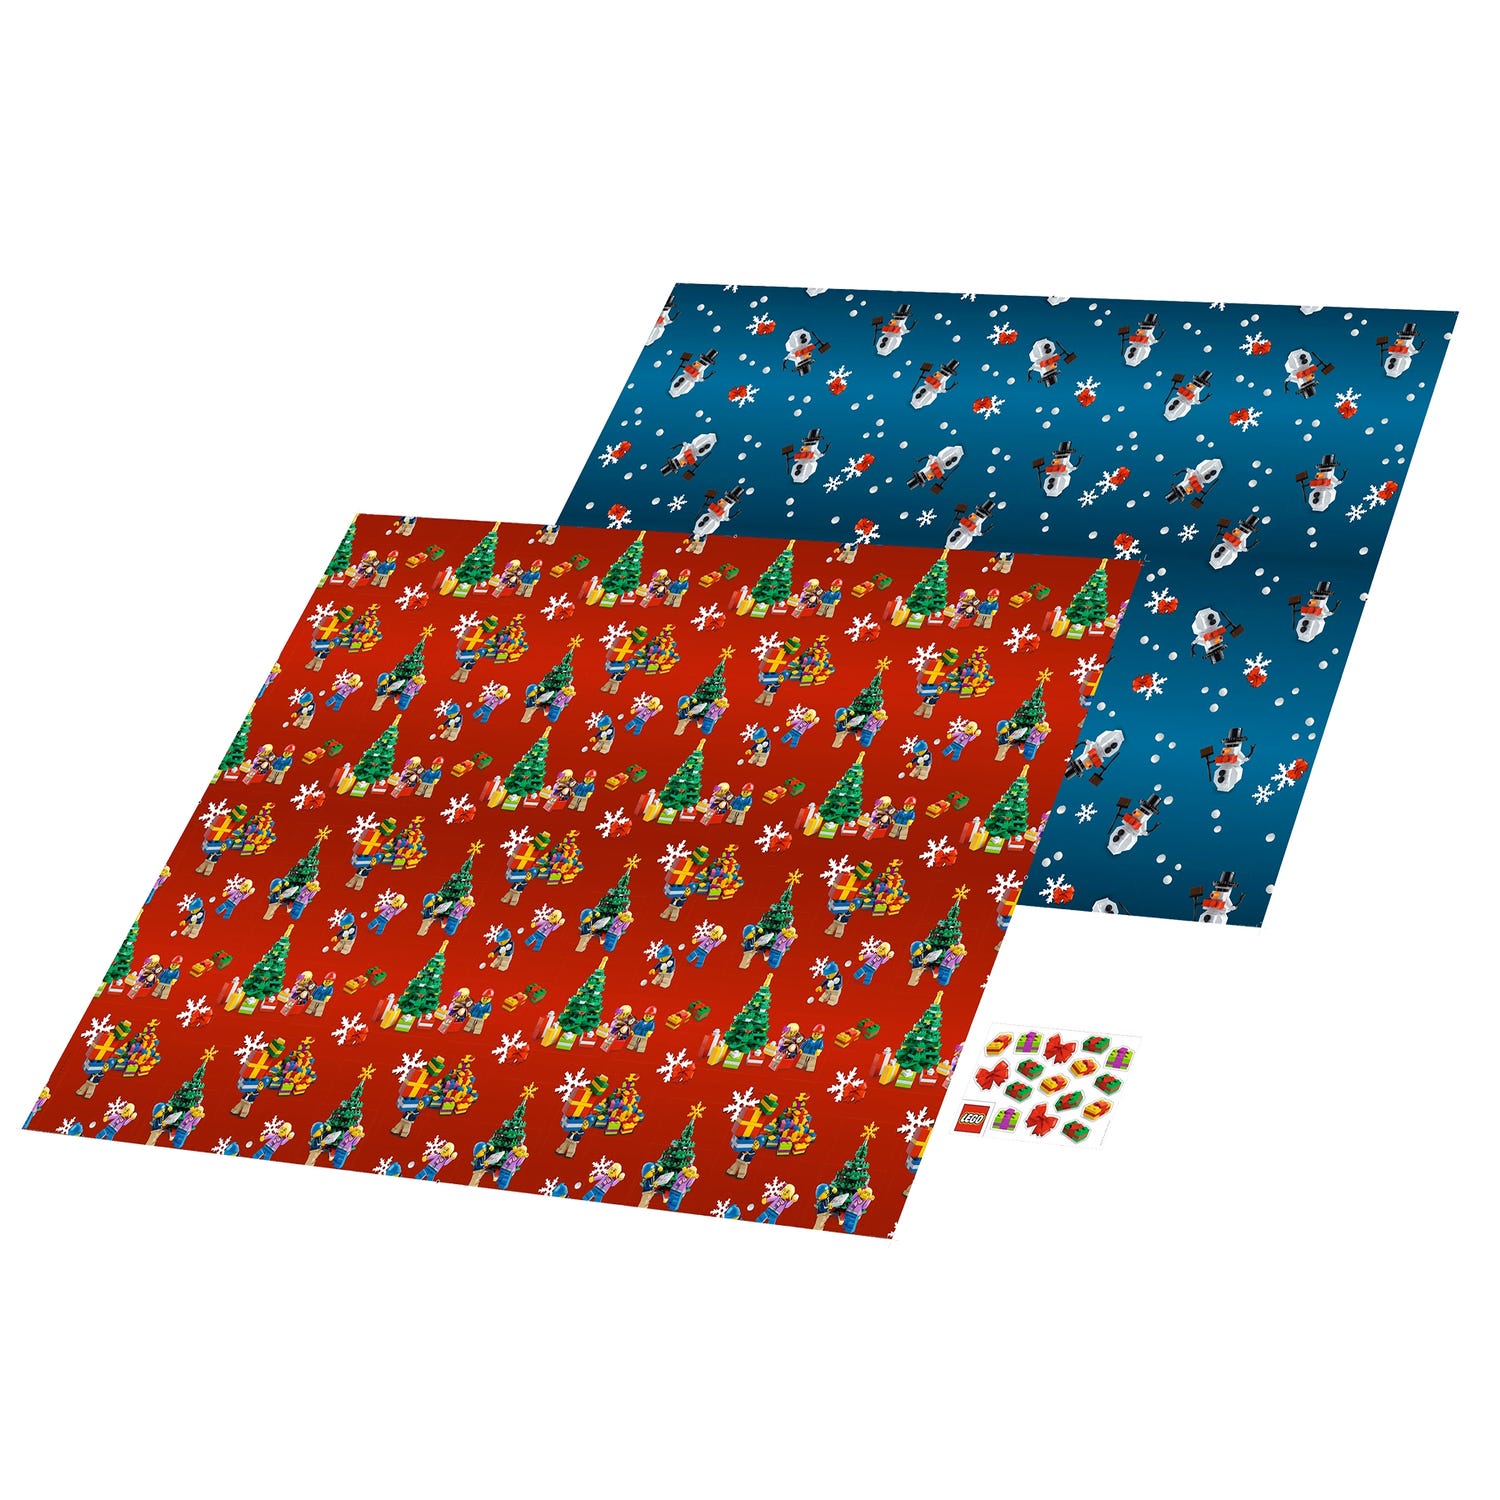 Lego Inspired Wrapping Paper, Lego Gift, Lego Gift Wrap